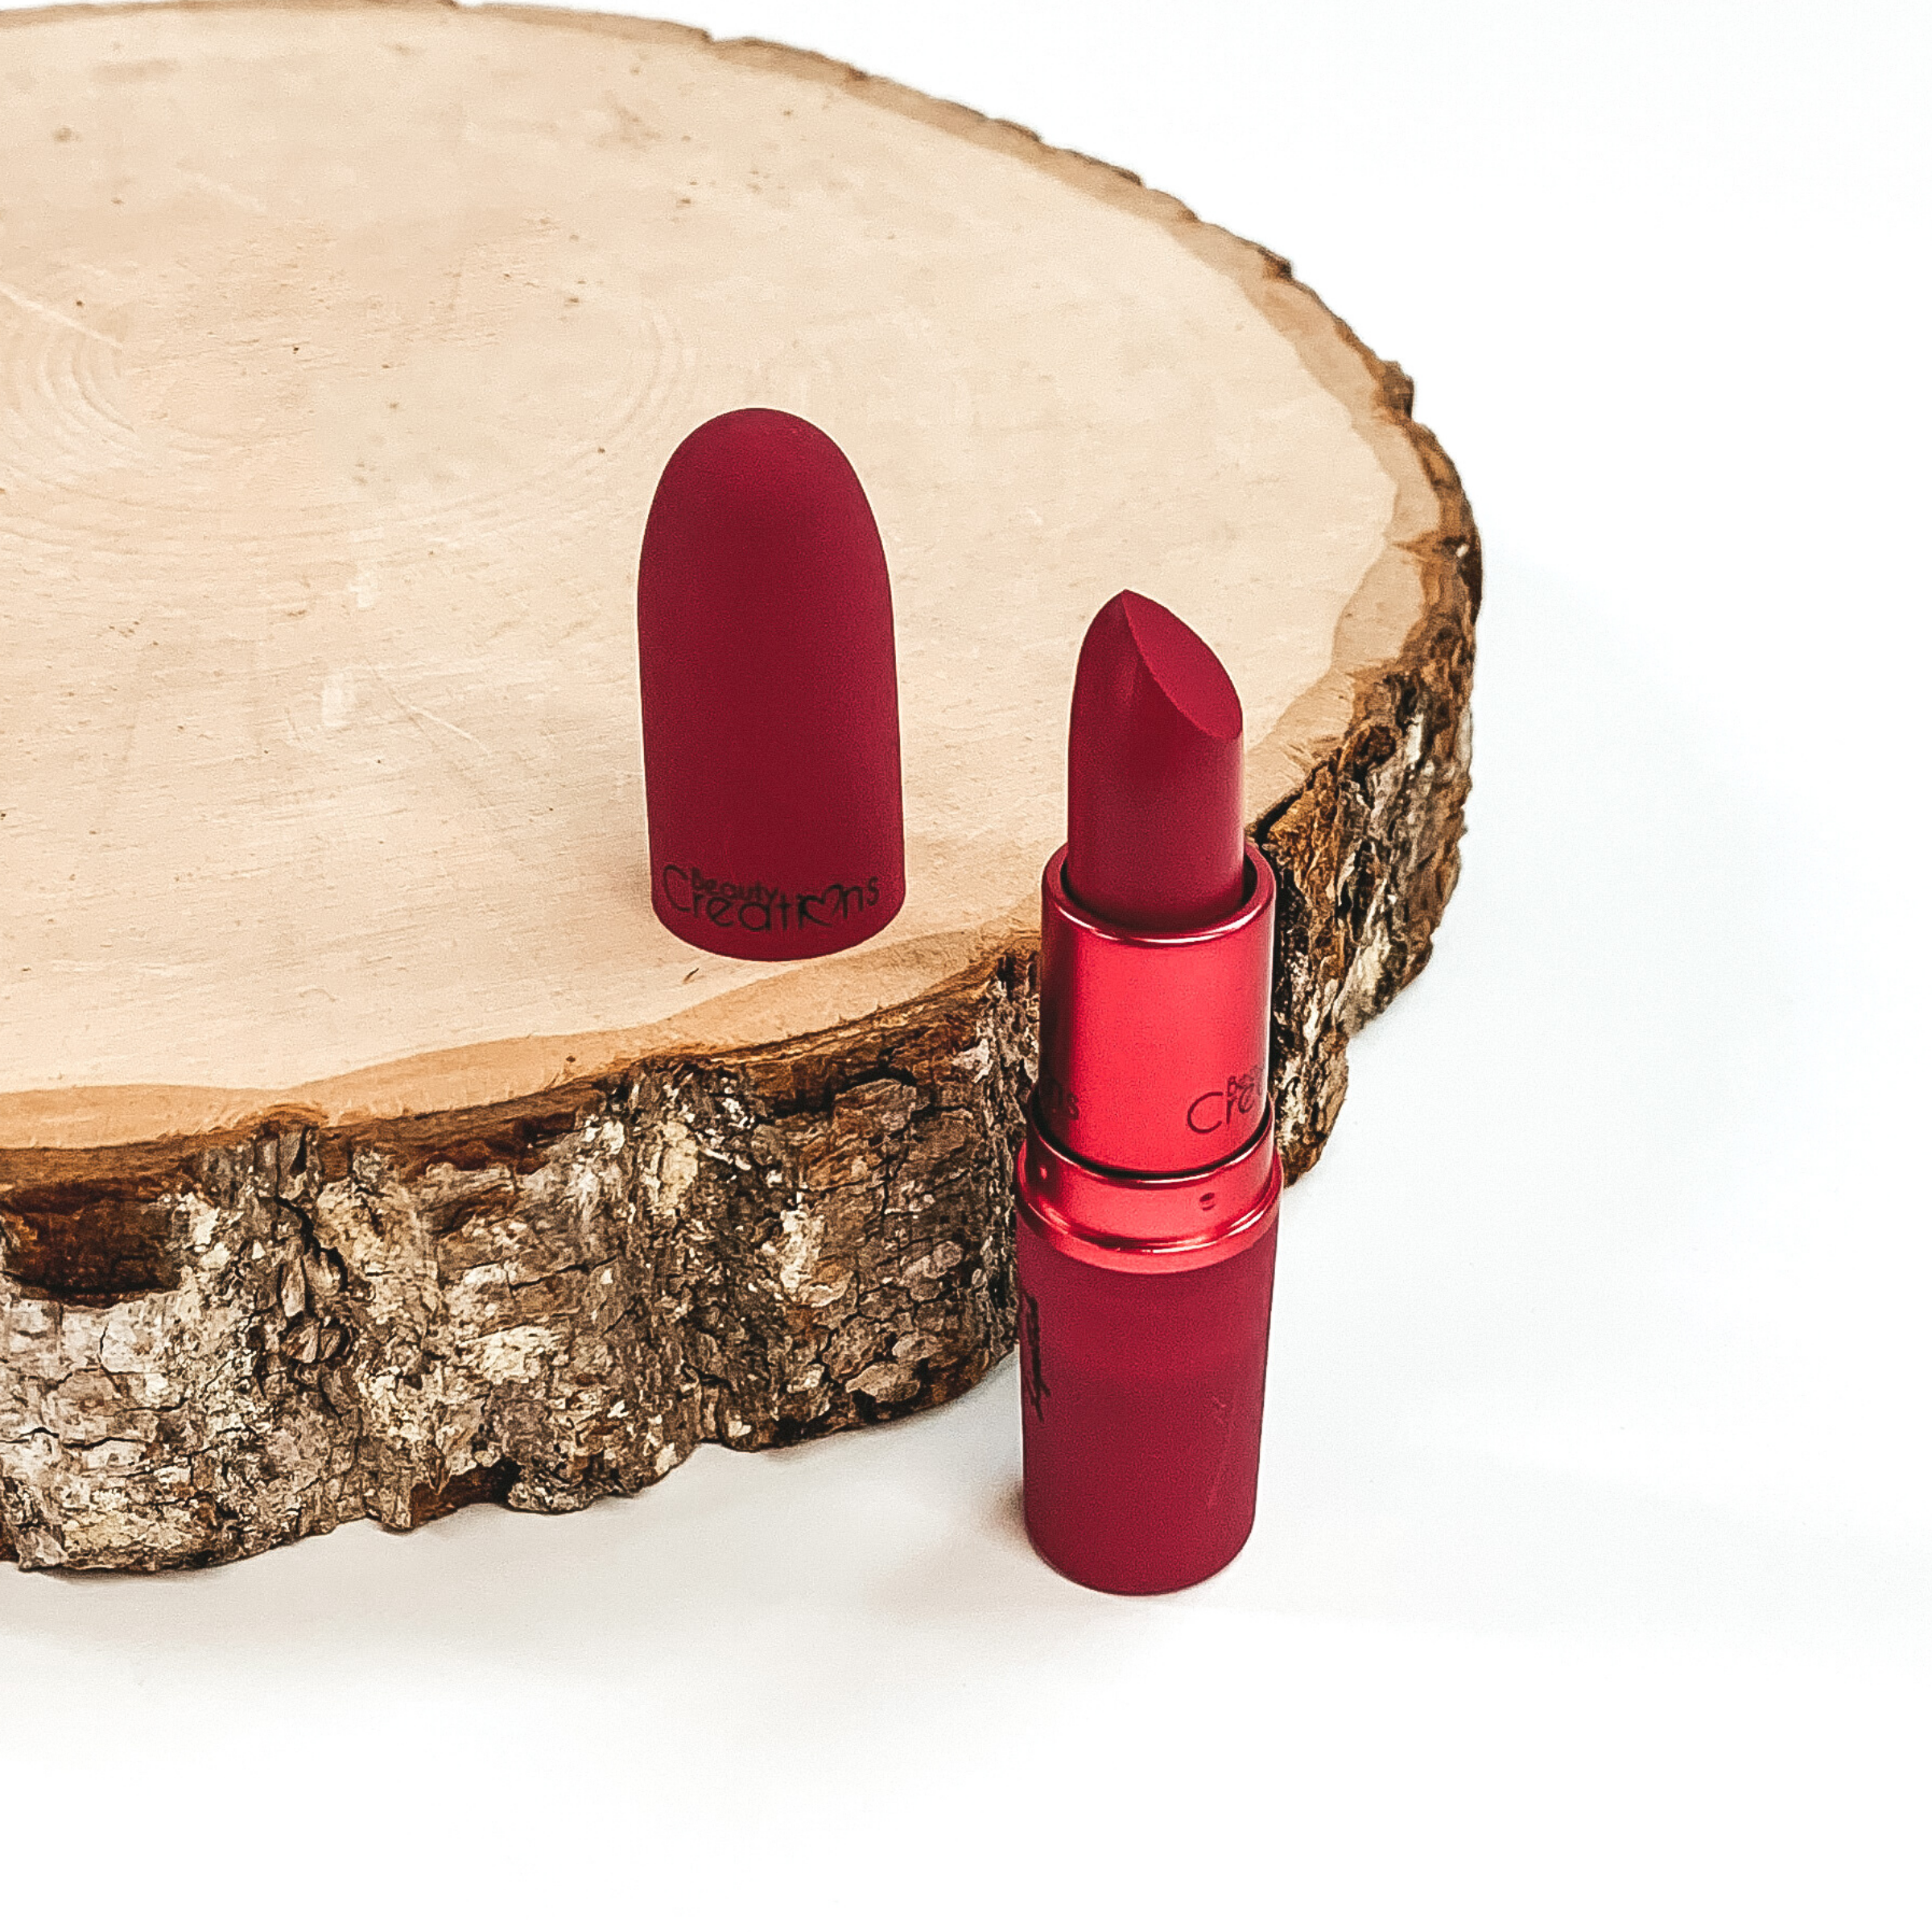 Shade sugar bomb lipstick that is opened and twisted up. The tube is standing on a white background and next to it is some wood that the lid from the lipstick is placed on.